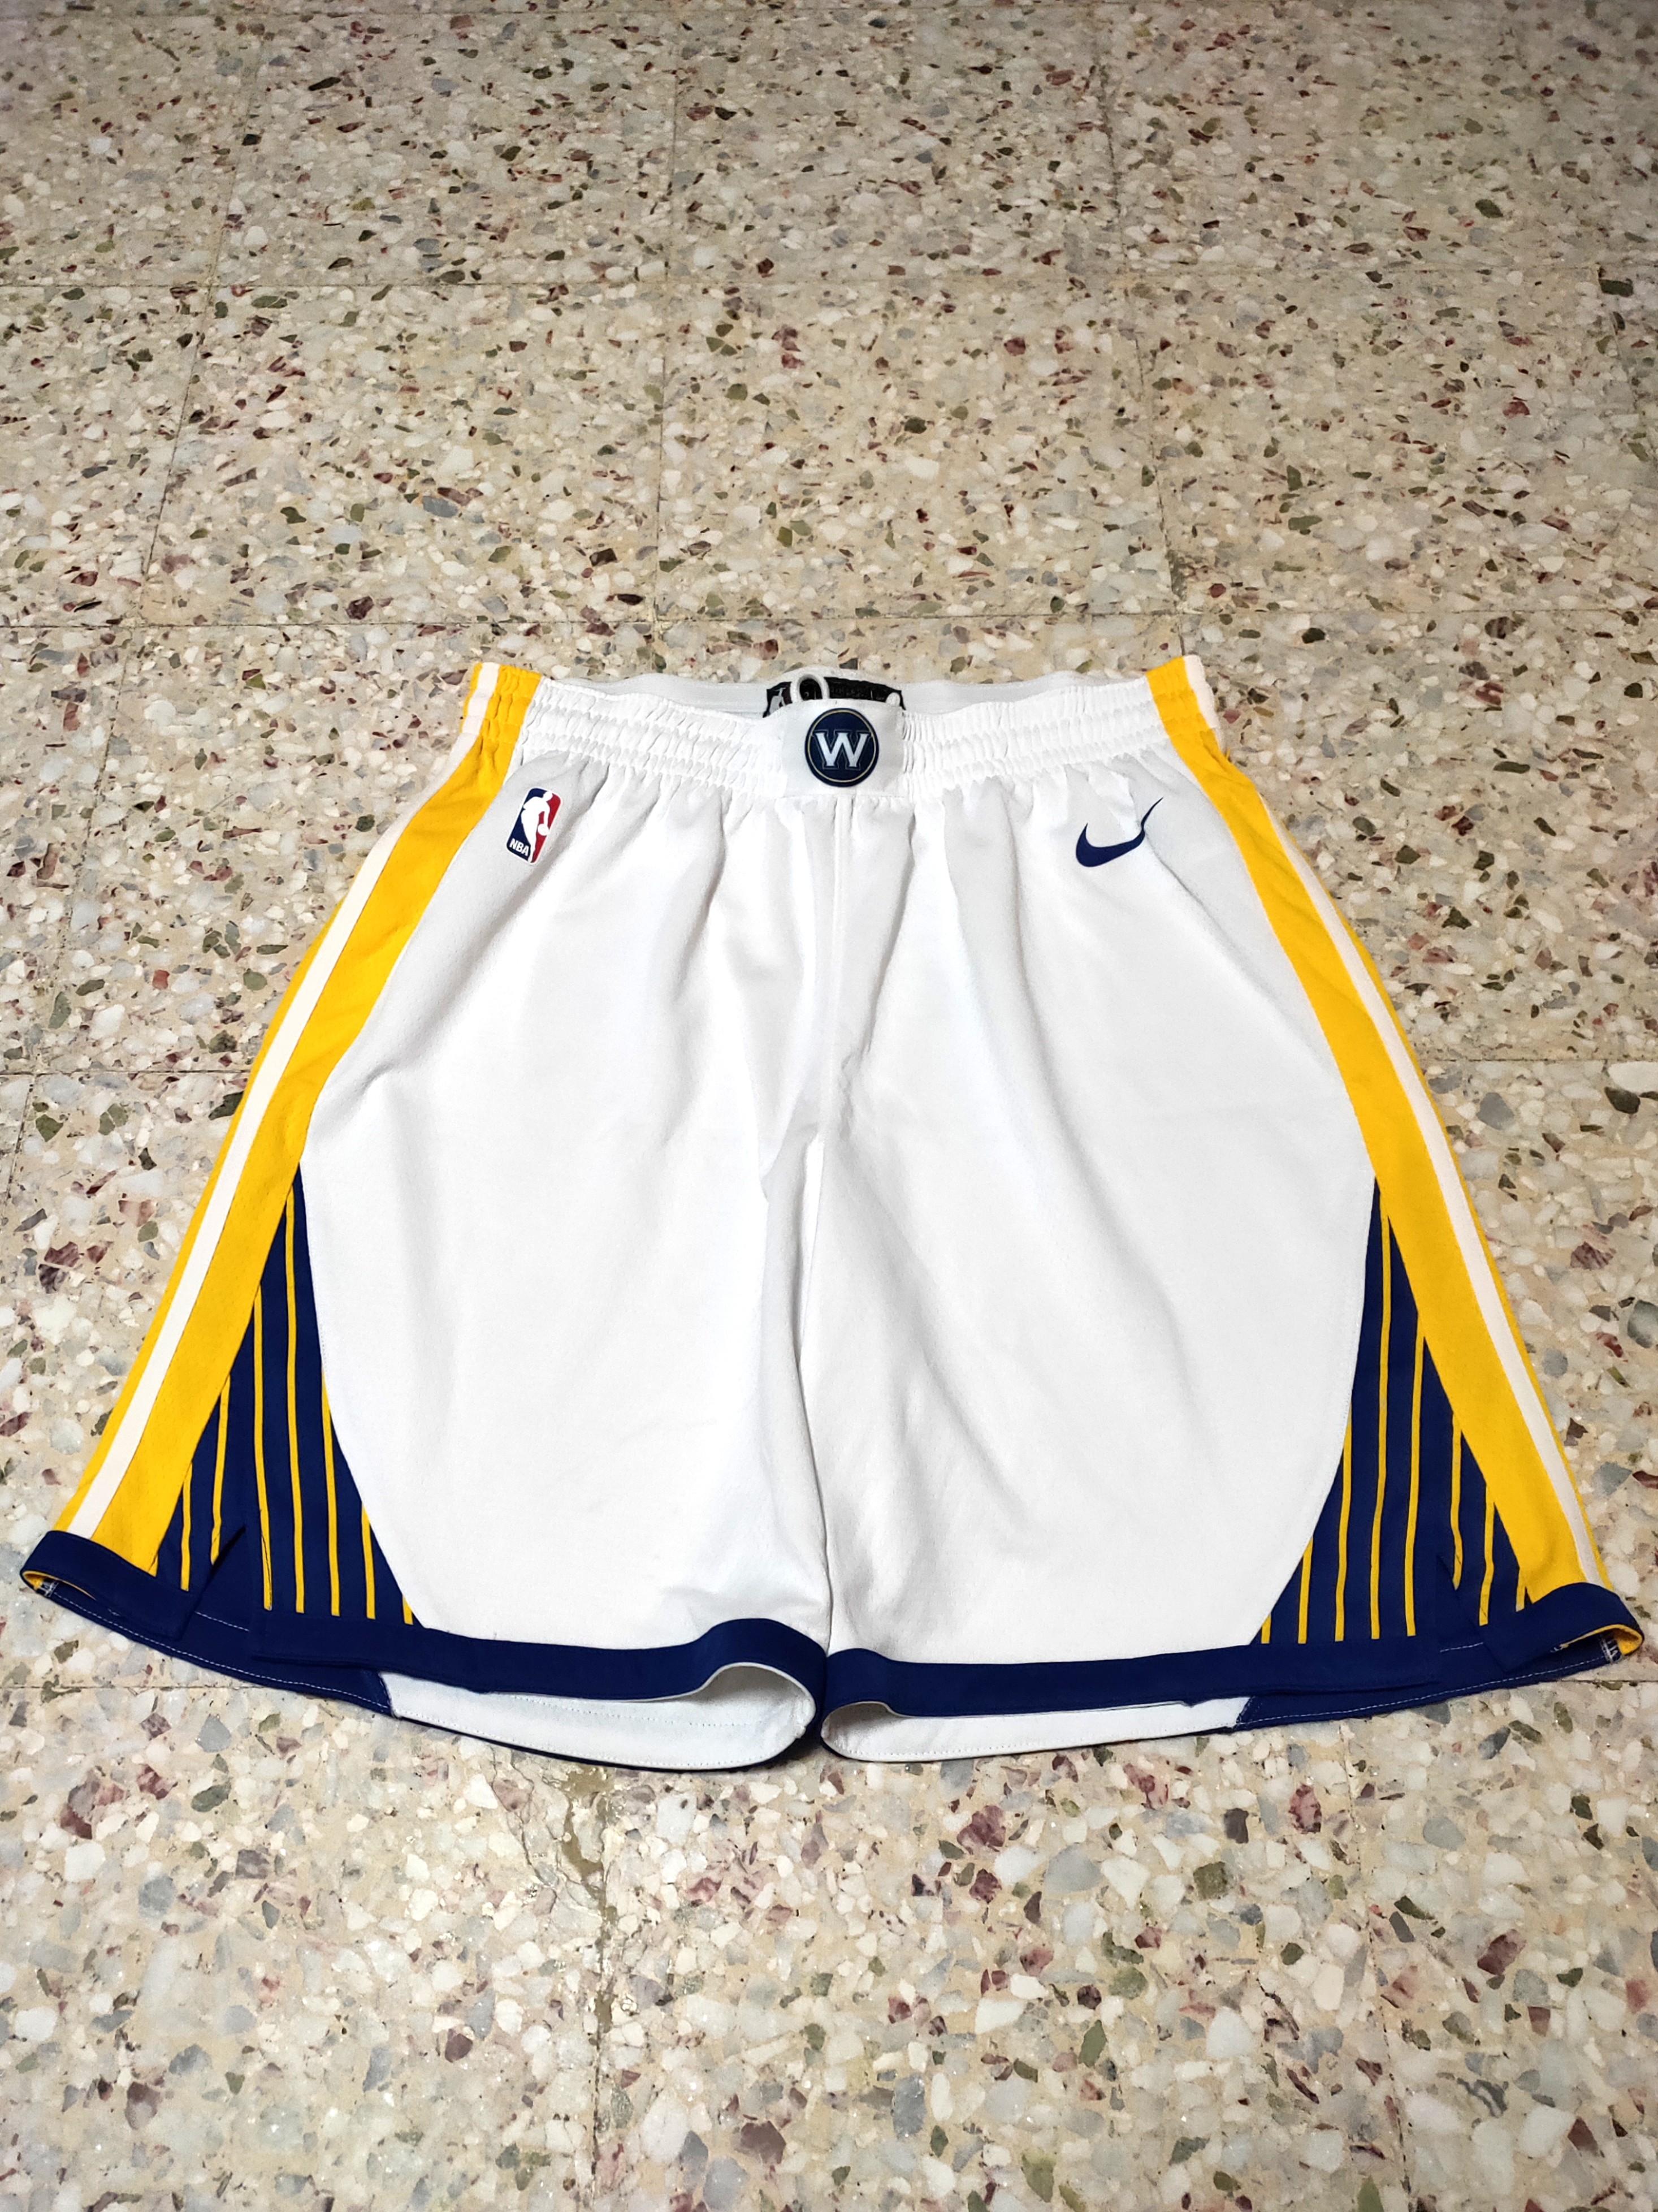 golden state warriors shorts for sale